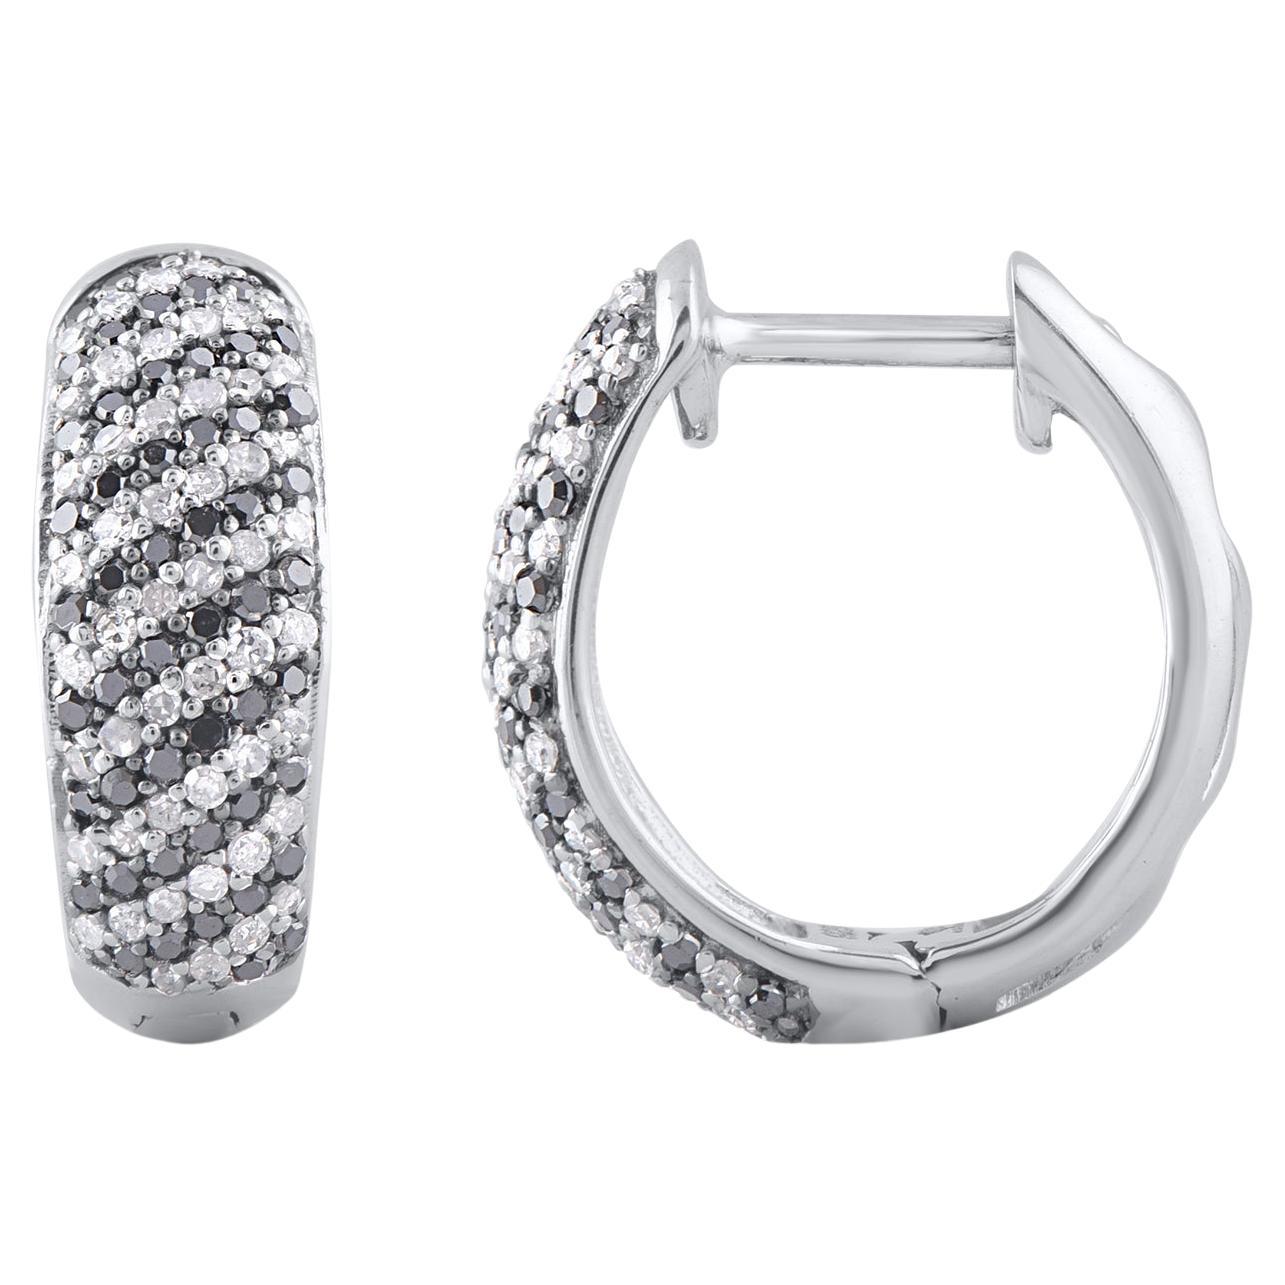 Bring charm to your look with this diamond hoop earrings. This earring is beautifully designed and studded with 200 single cut round diamond and black treated diamonds in pave setting. We only use natural, 100% conflict free diamonds which shines in